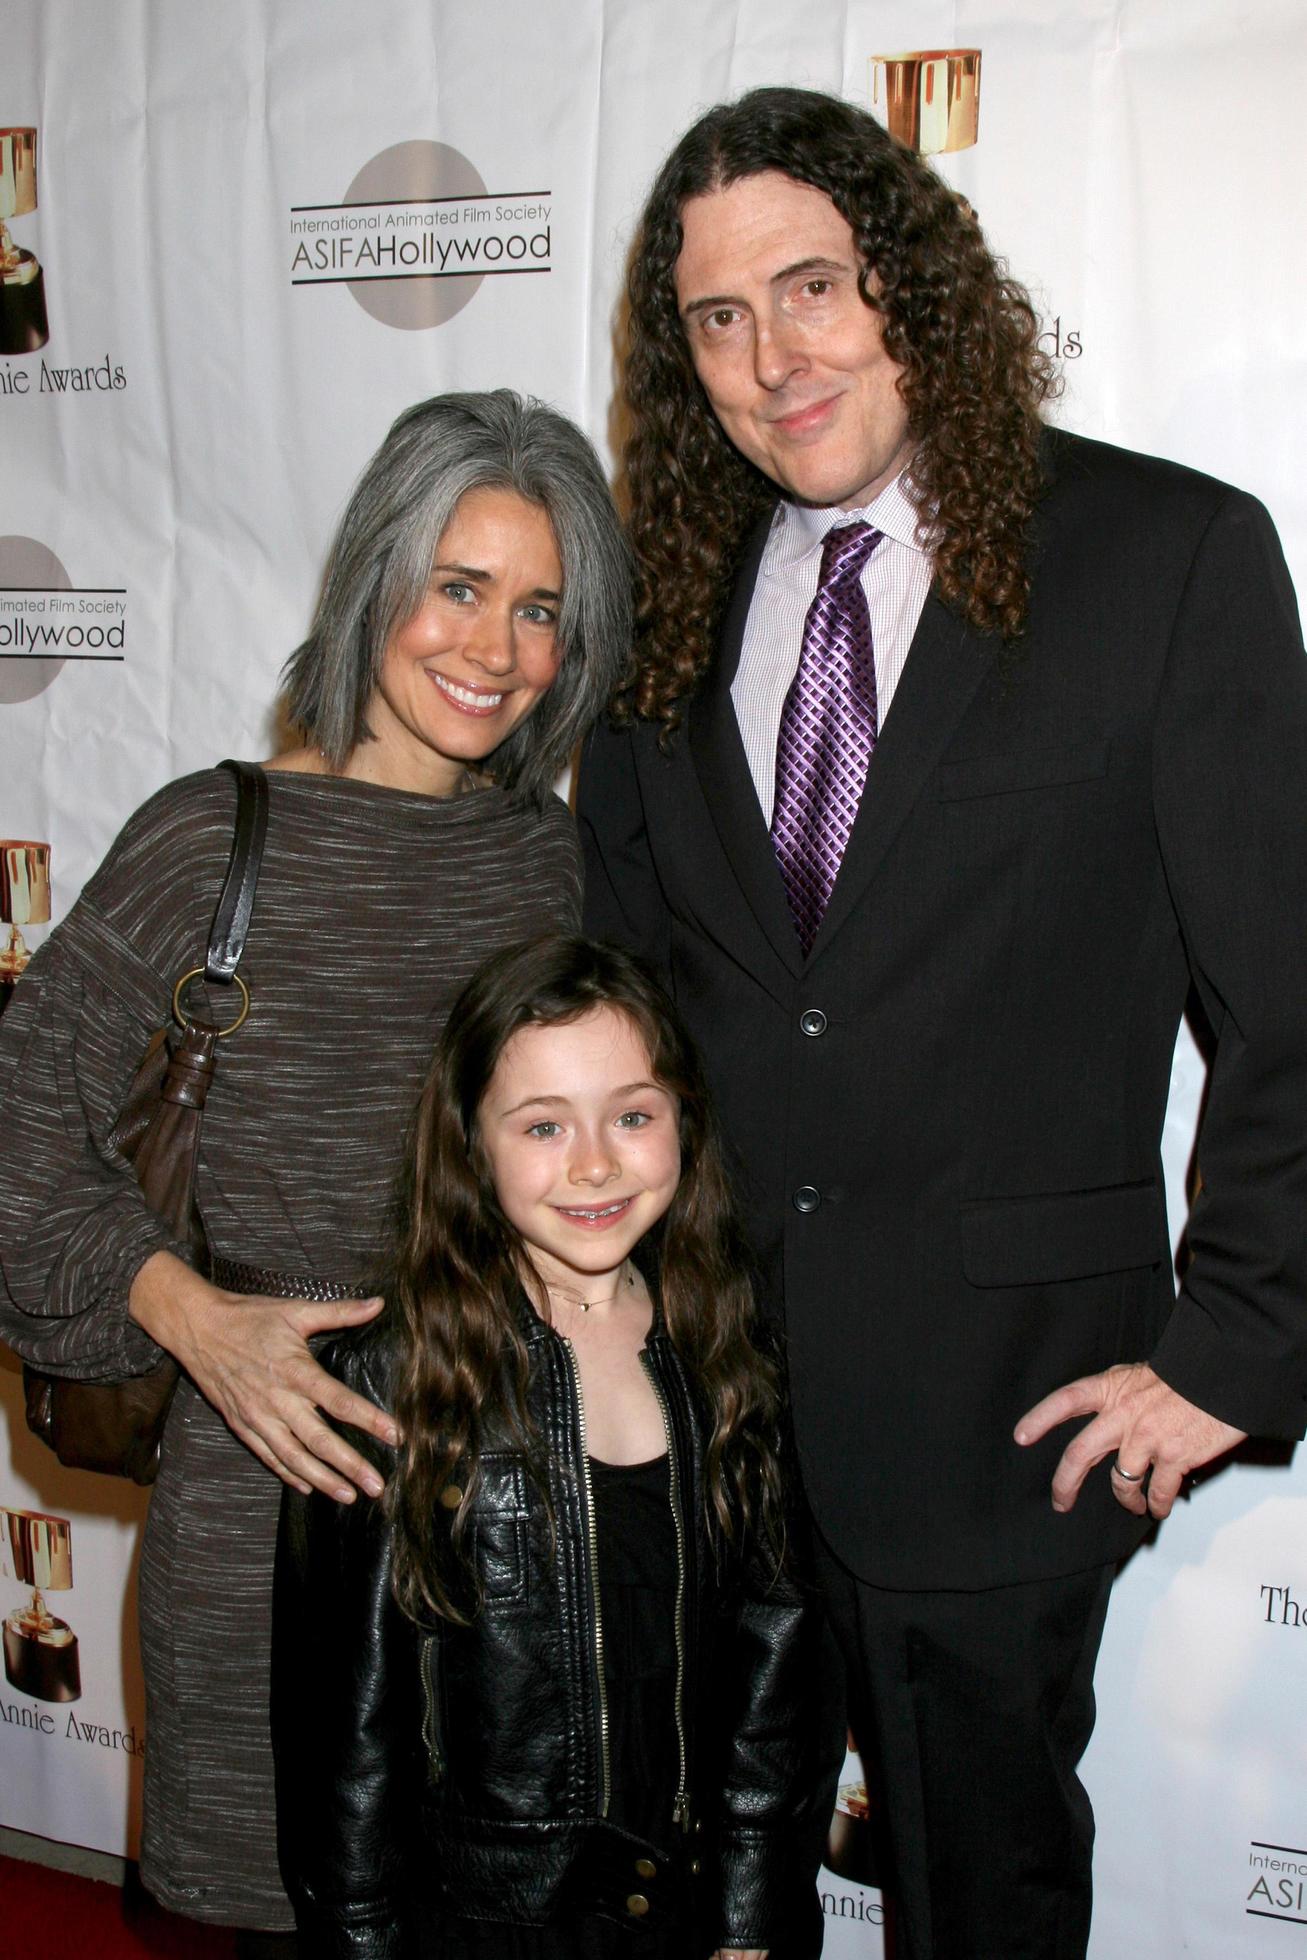 LOS ANGELES FEB 4 Weird Al Yankovic, wife, daughter arrives at the